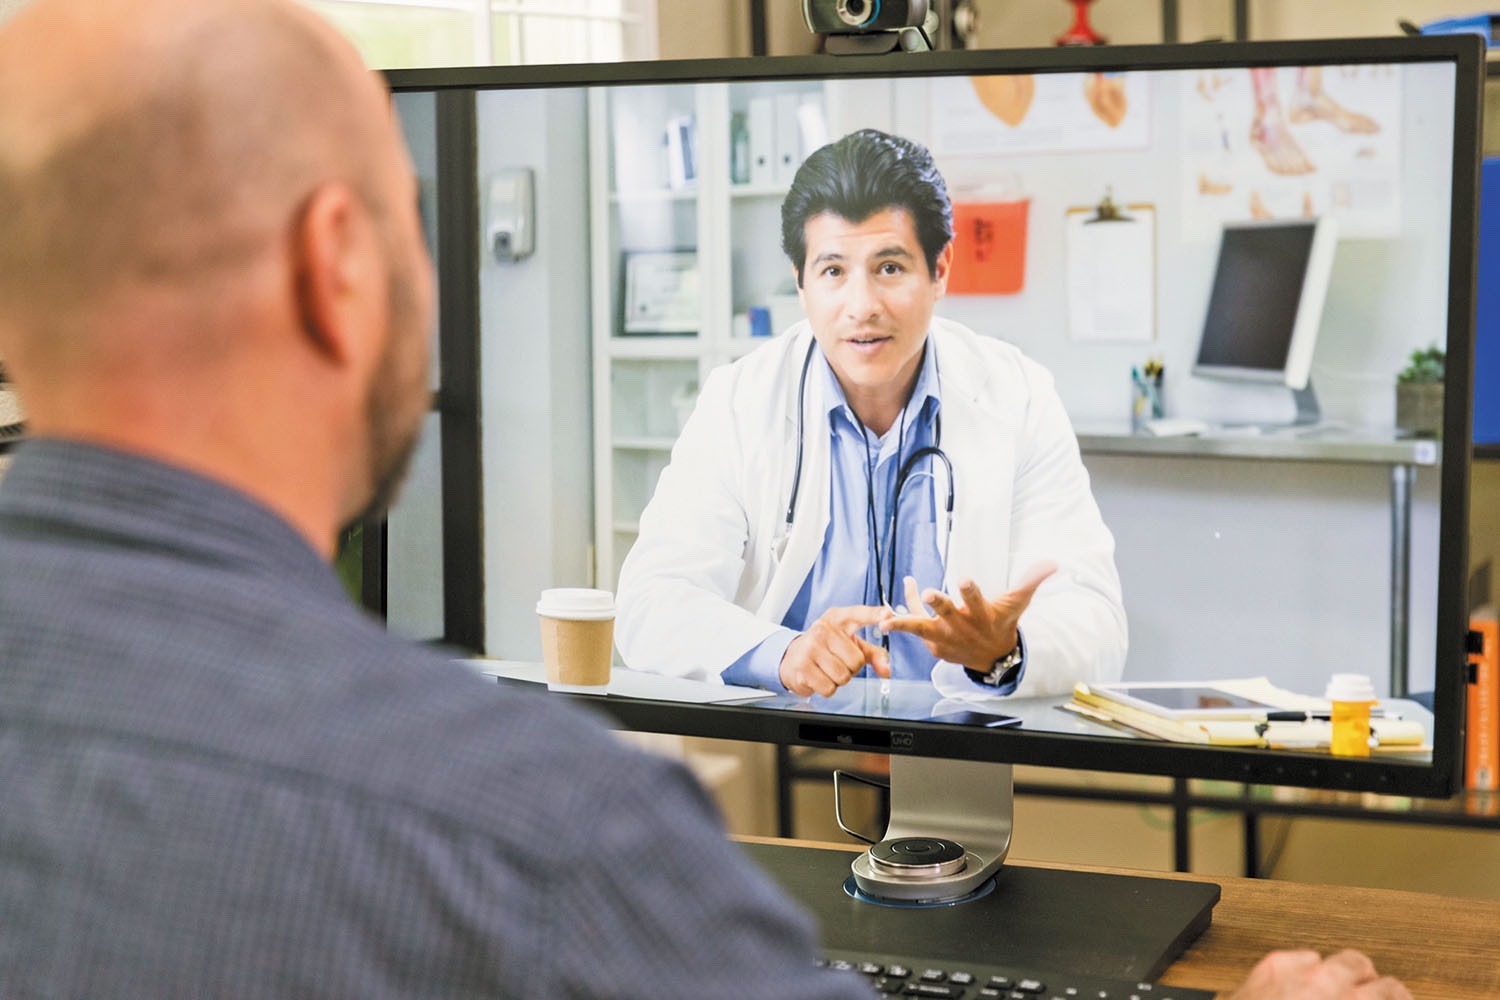 How the health industry is using Jotform and Zoom to help patients